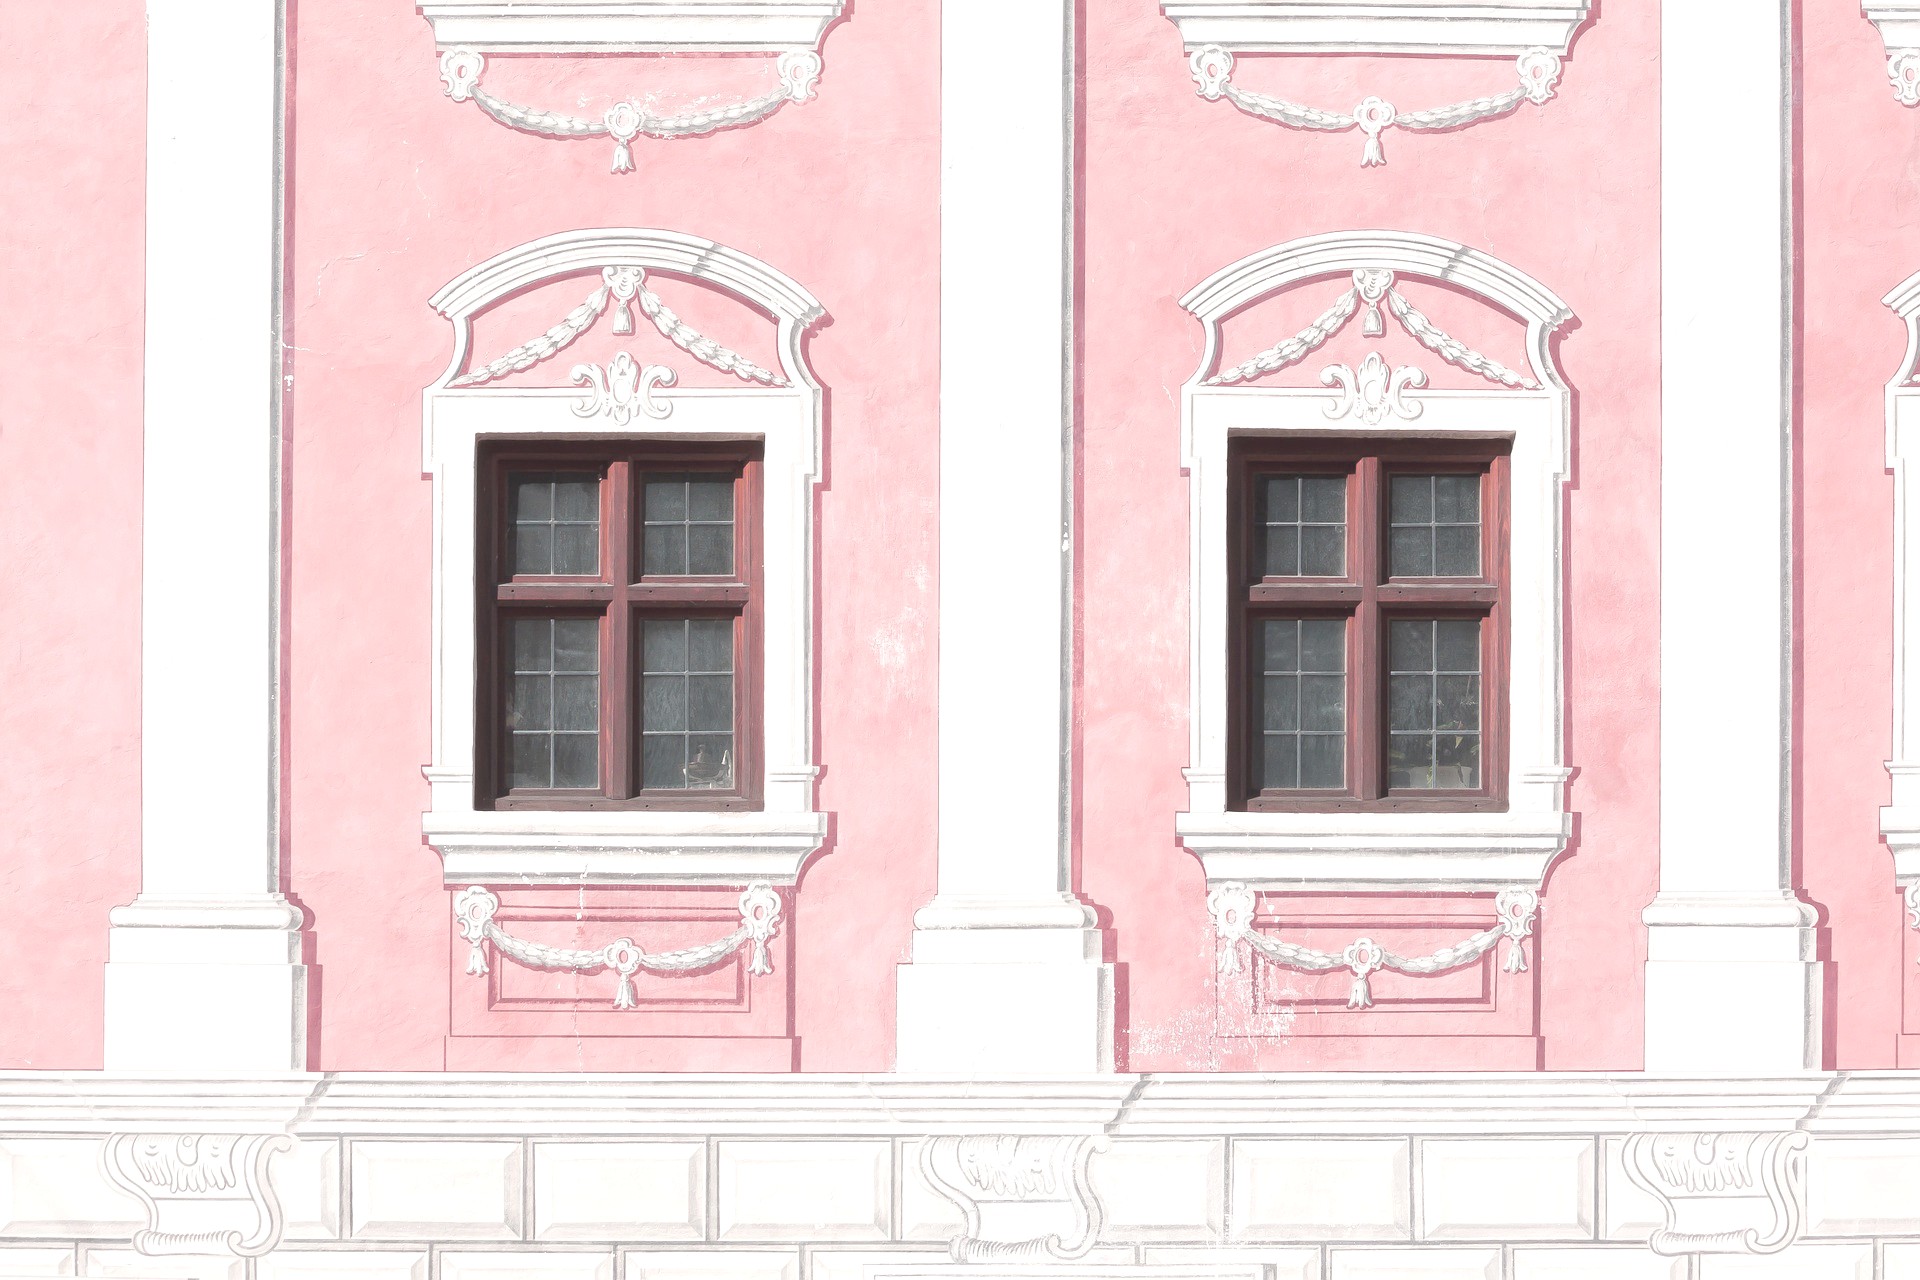 <img src="pink.jpg" alt="pink fancy house with white detail"/> 